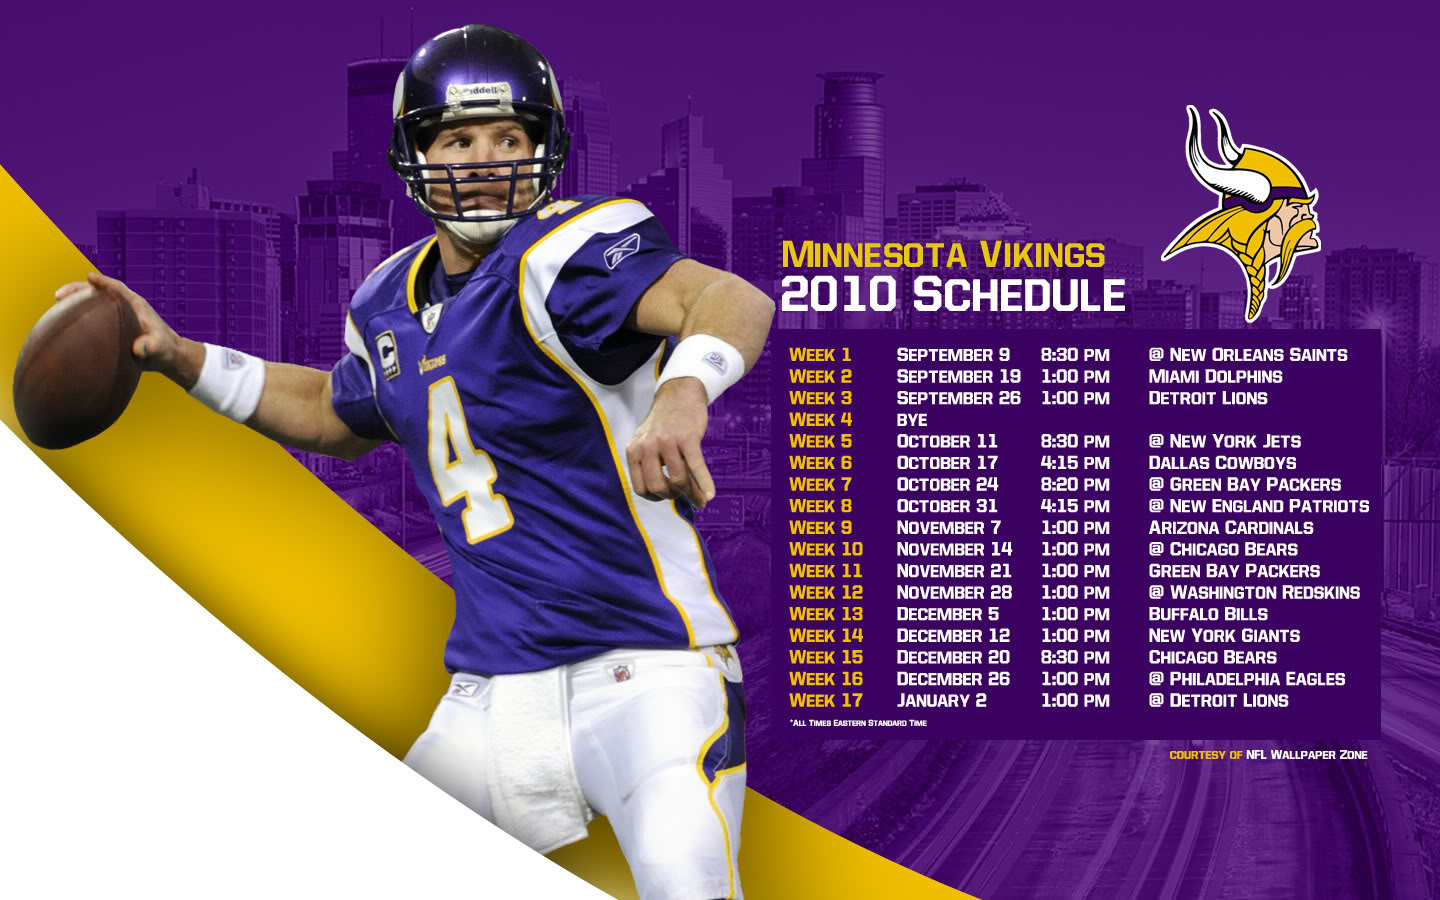 Minnesota Vikings Schedule Wallpaper Photo By Nflwallpaperzone